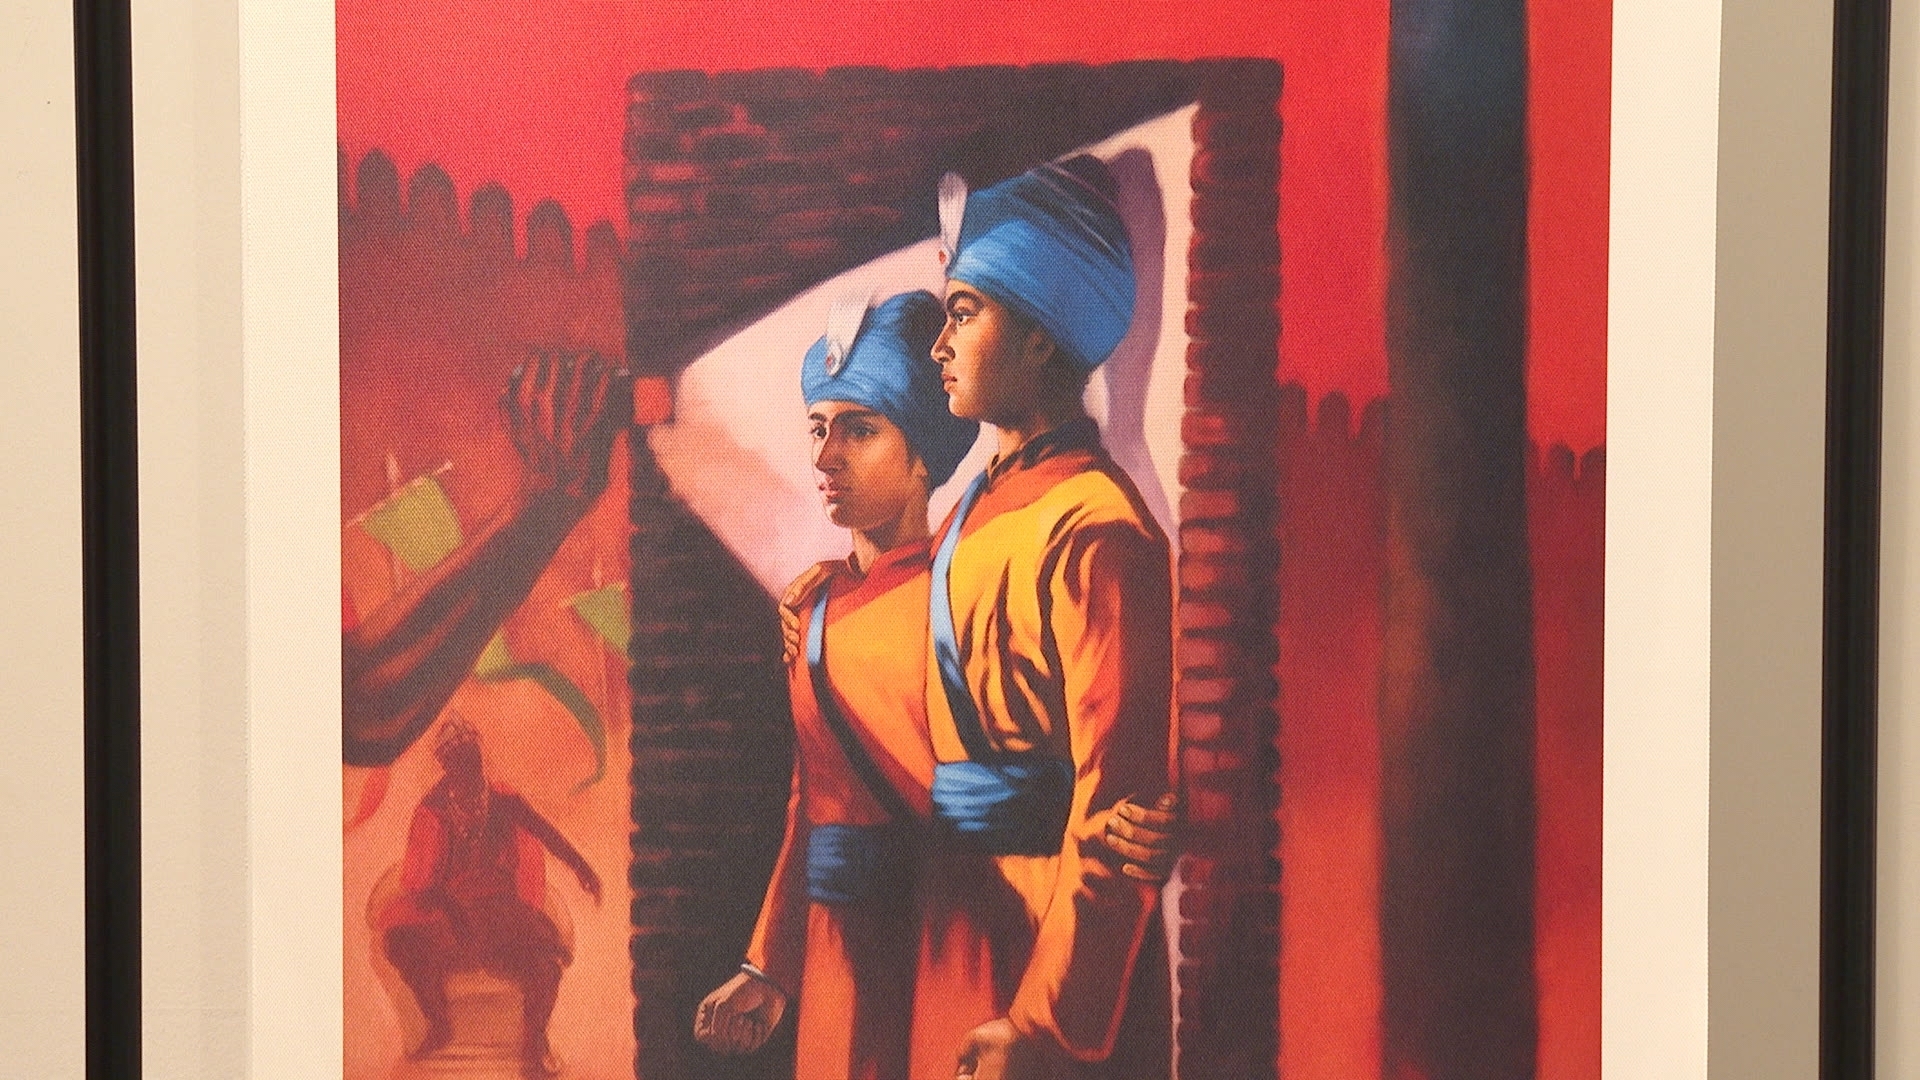 The exhibition combines Sikh teachings with new forms of storytelling.